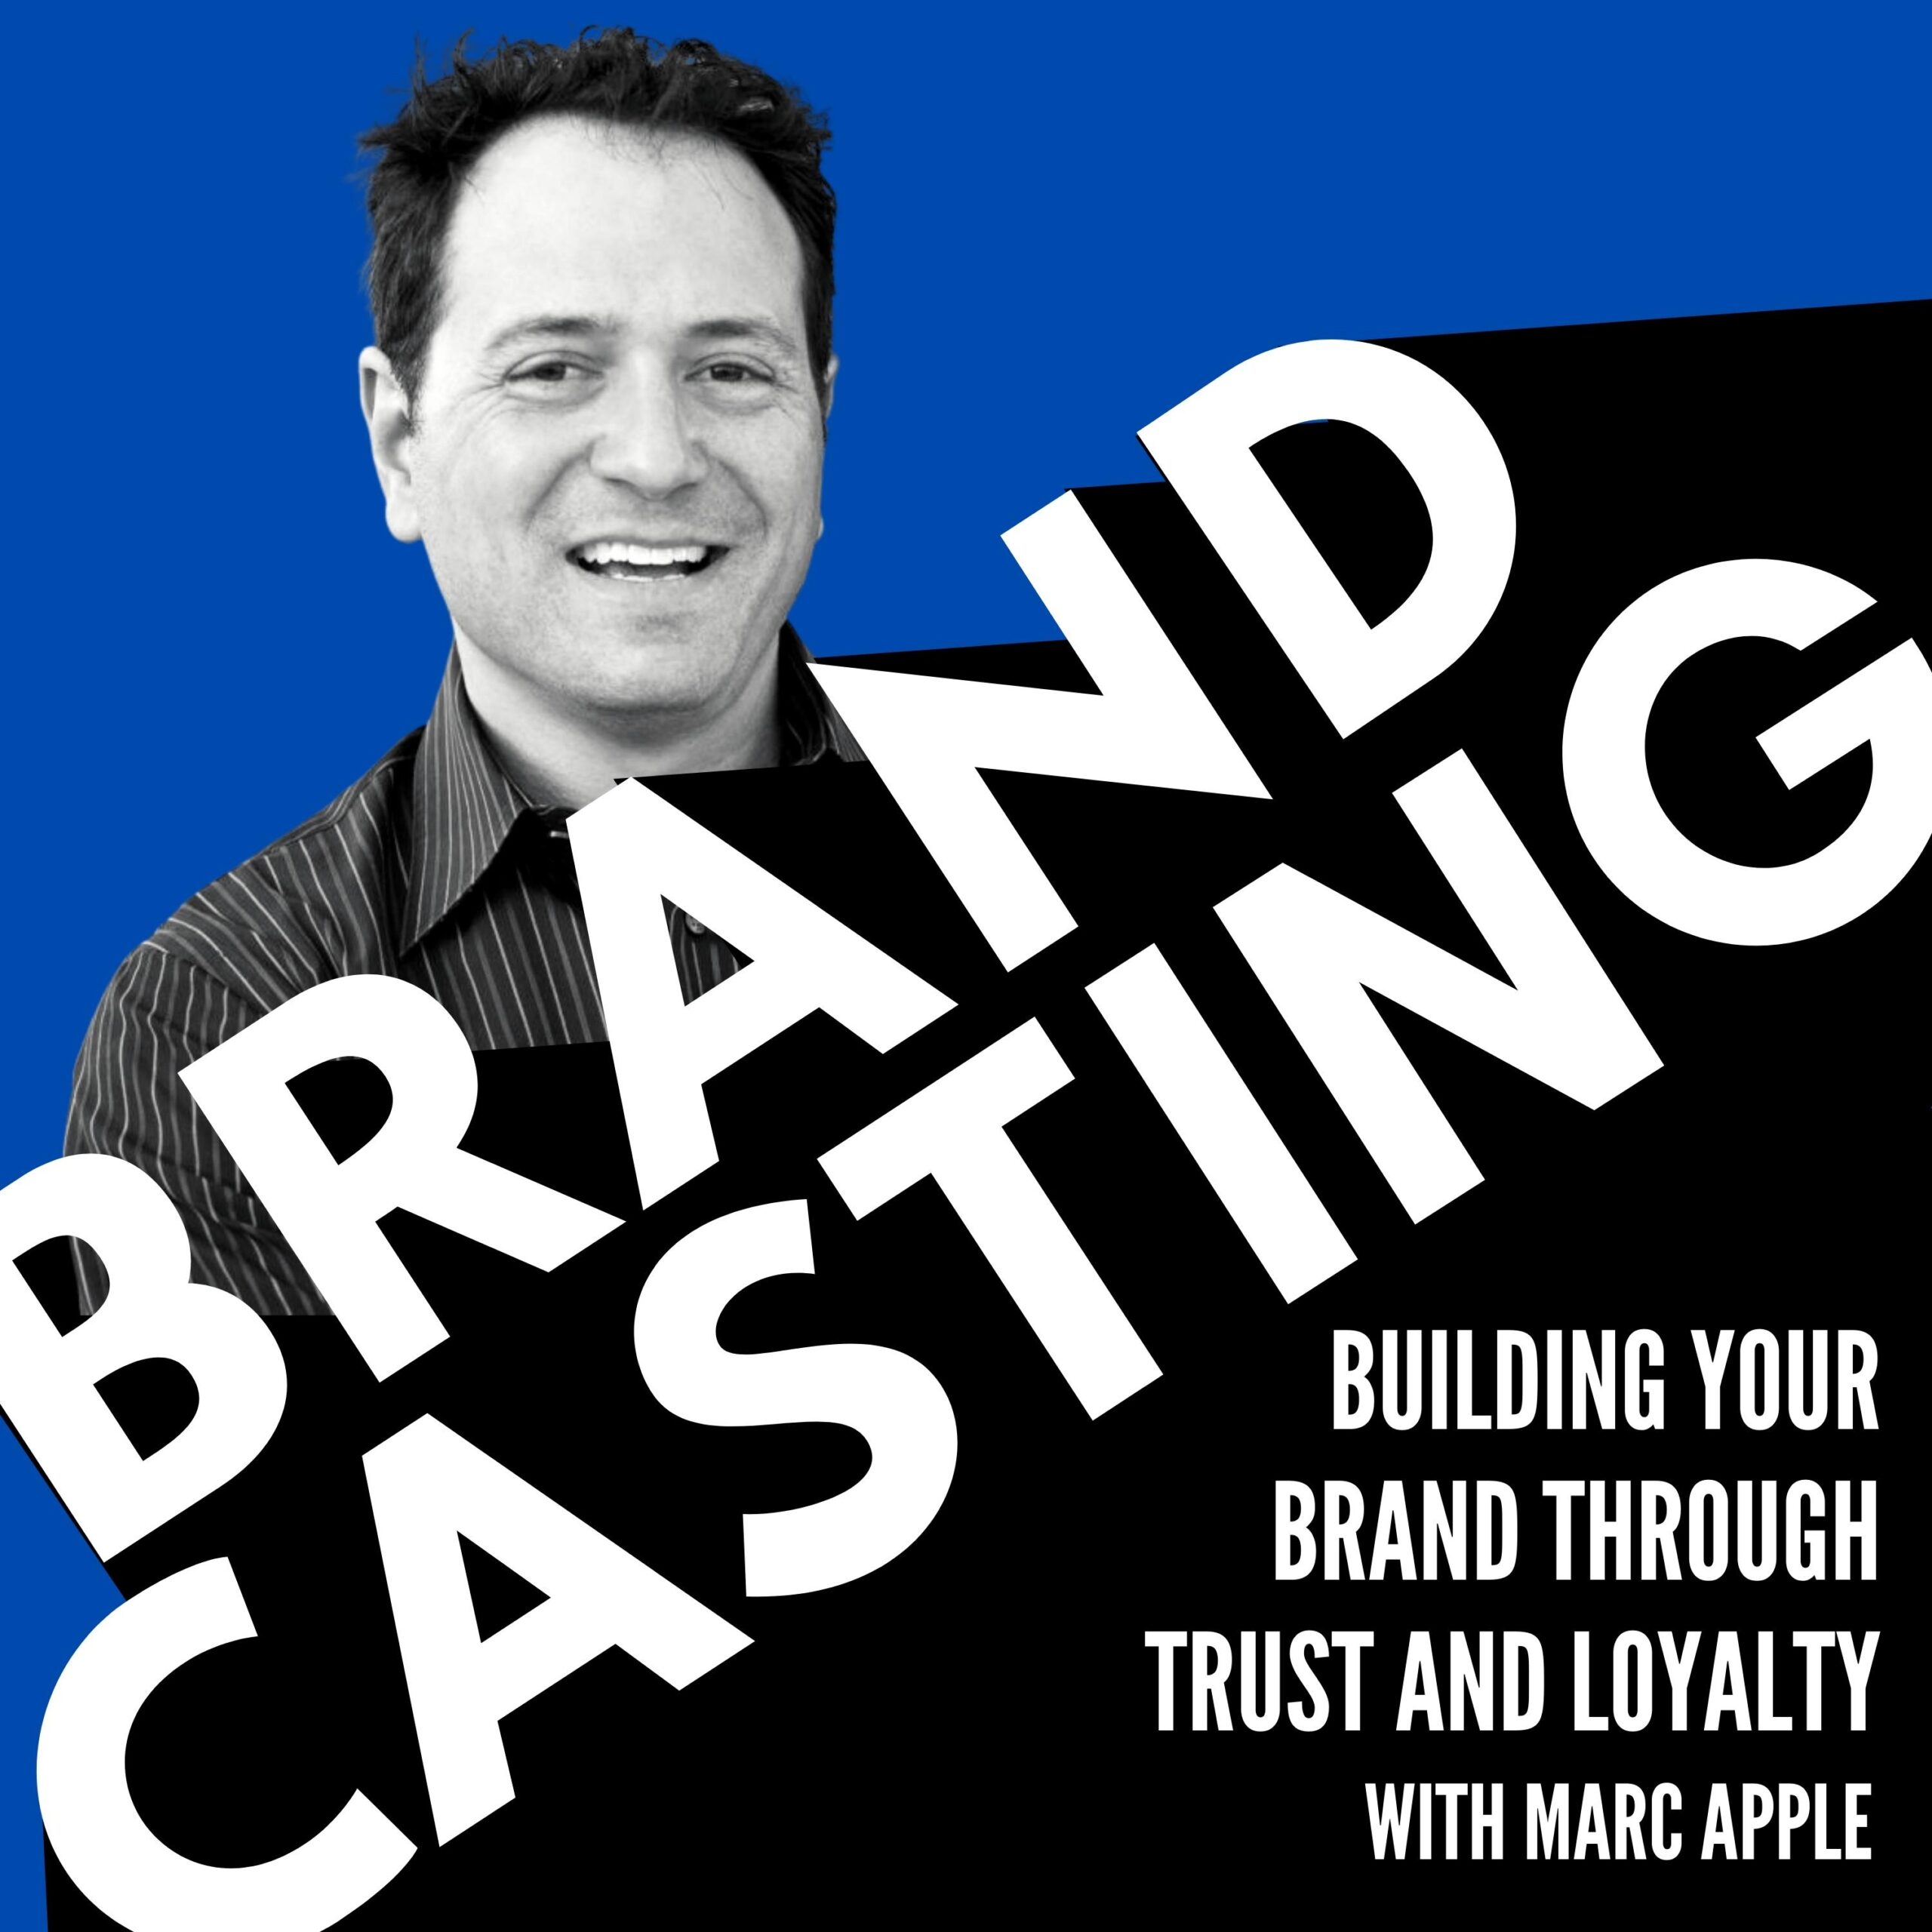 Brandcasting - Build Your Brand through Trust and Loyalty with Marc Apple